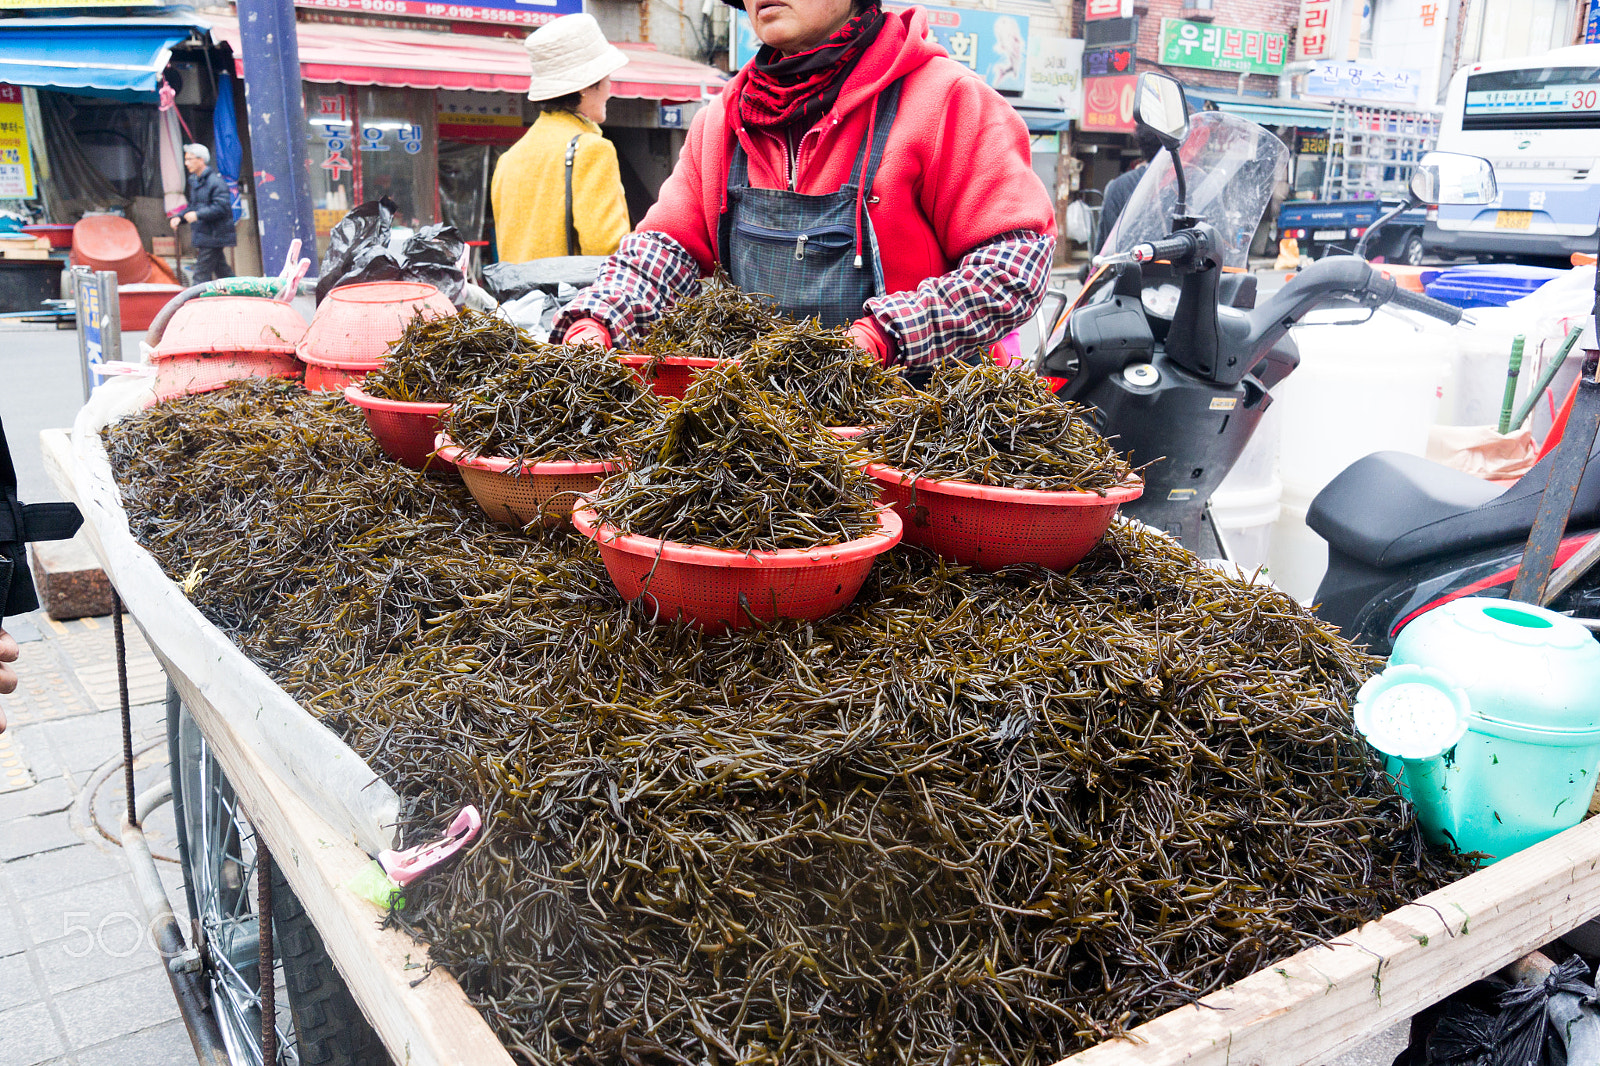 Nikon 1 AW1 + Nikon 1 Nikkor AW 11-27.5mm F3.5-5.6 sample photo. A woman sell seaweed on a cart in seafood market photography